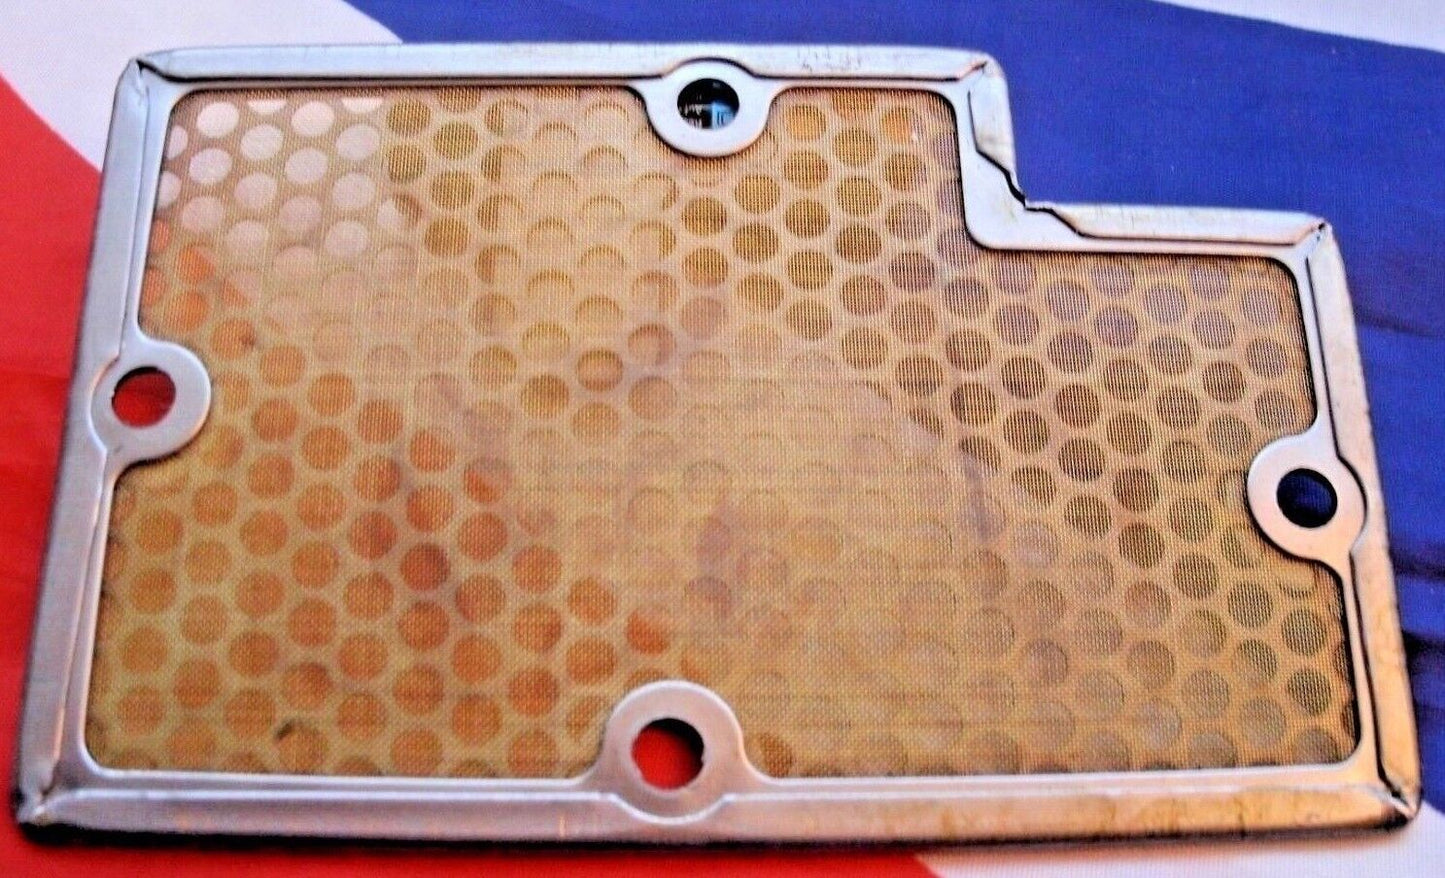 1 FORD Borg Warner 35 Automatic Gearbox Steel Support Plate Kit With CORK Gasket